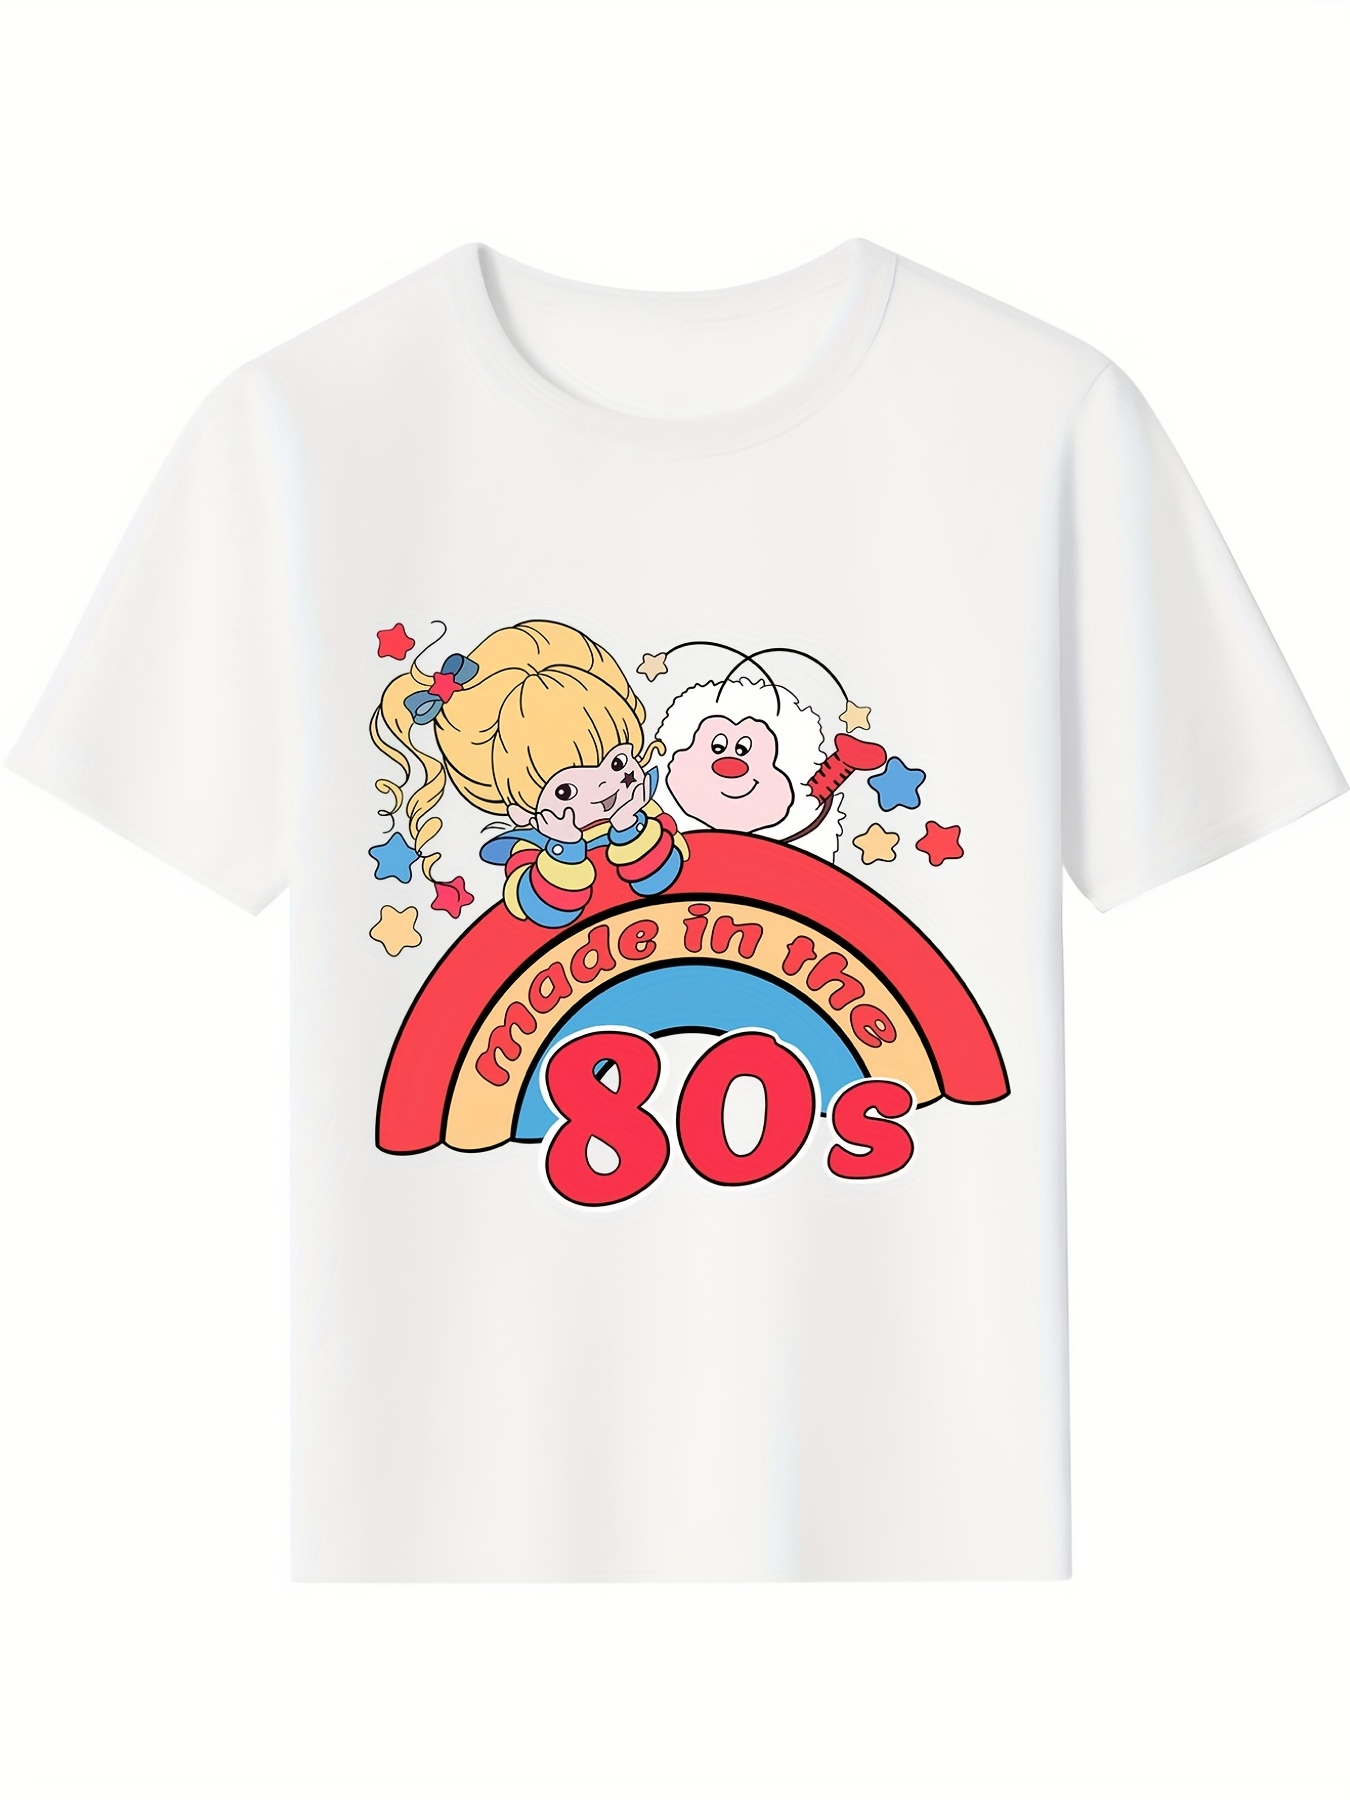 Vintage Tops: 80's T-Shirts